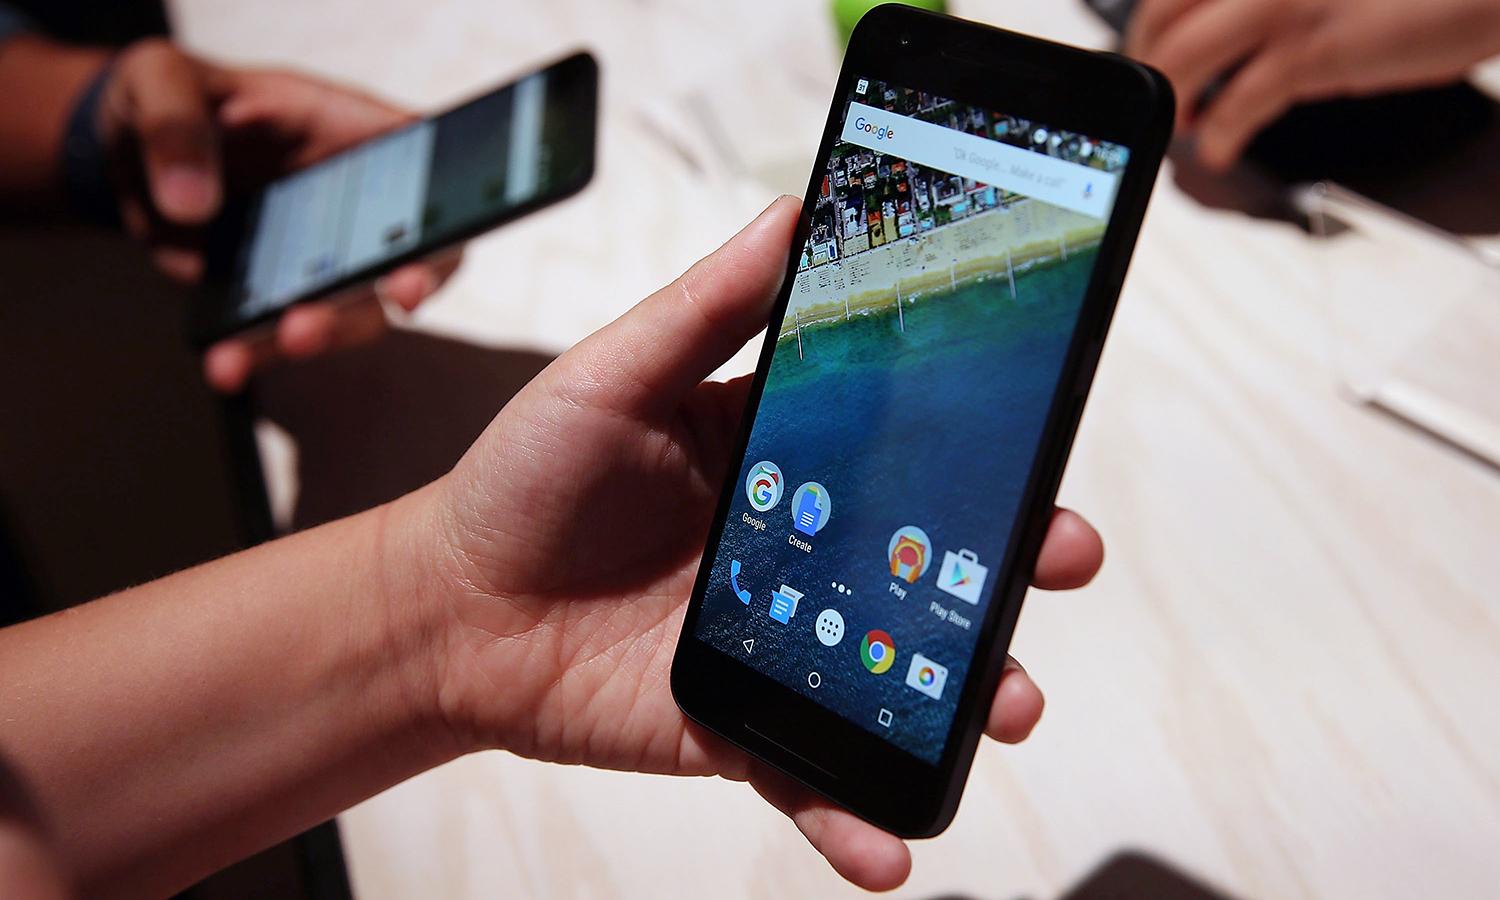 A person inspects a Nexus 5X phone